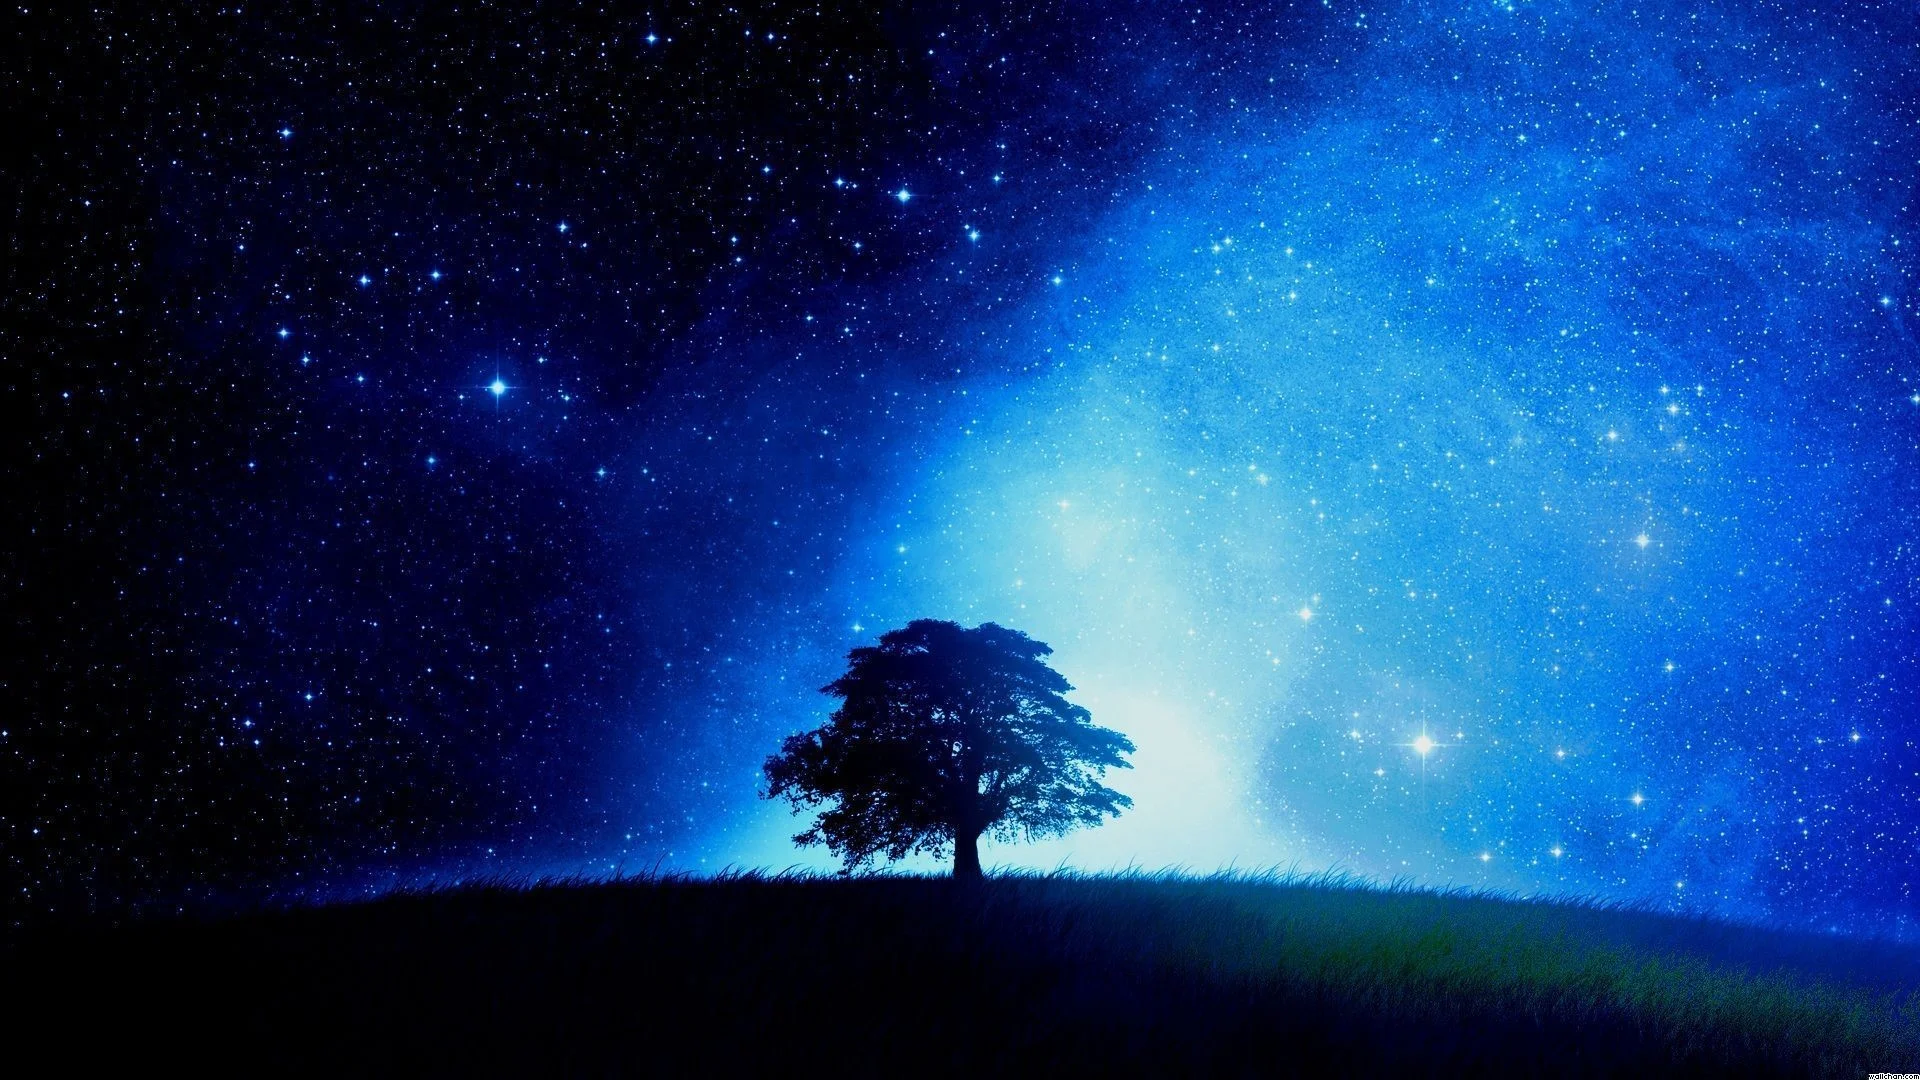 Night Sky Wallpaper For Free Android Places to Visit Pinterest 1920Ã—1080  Blue Night Sky